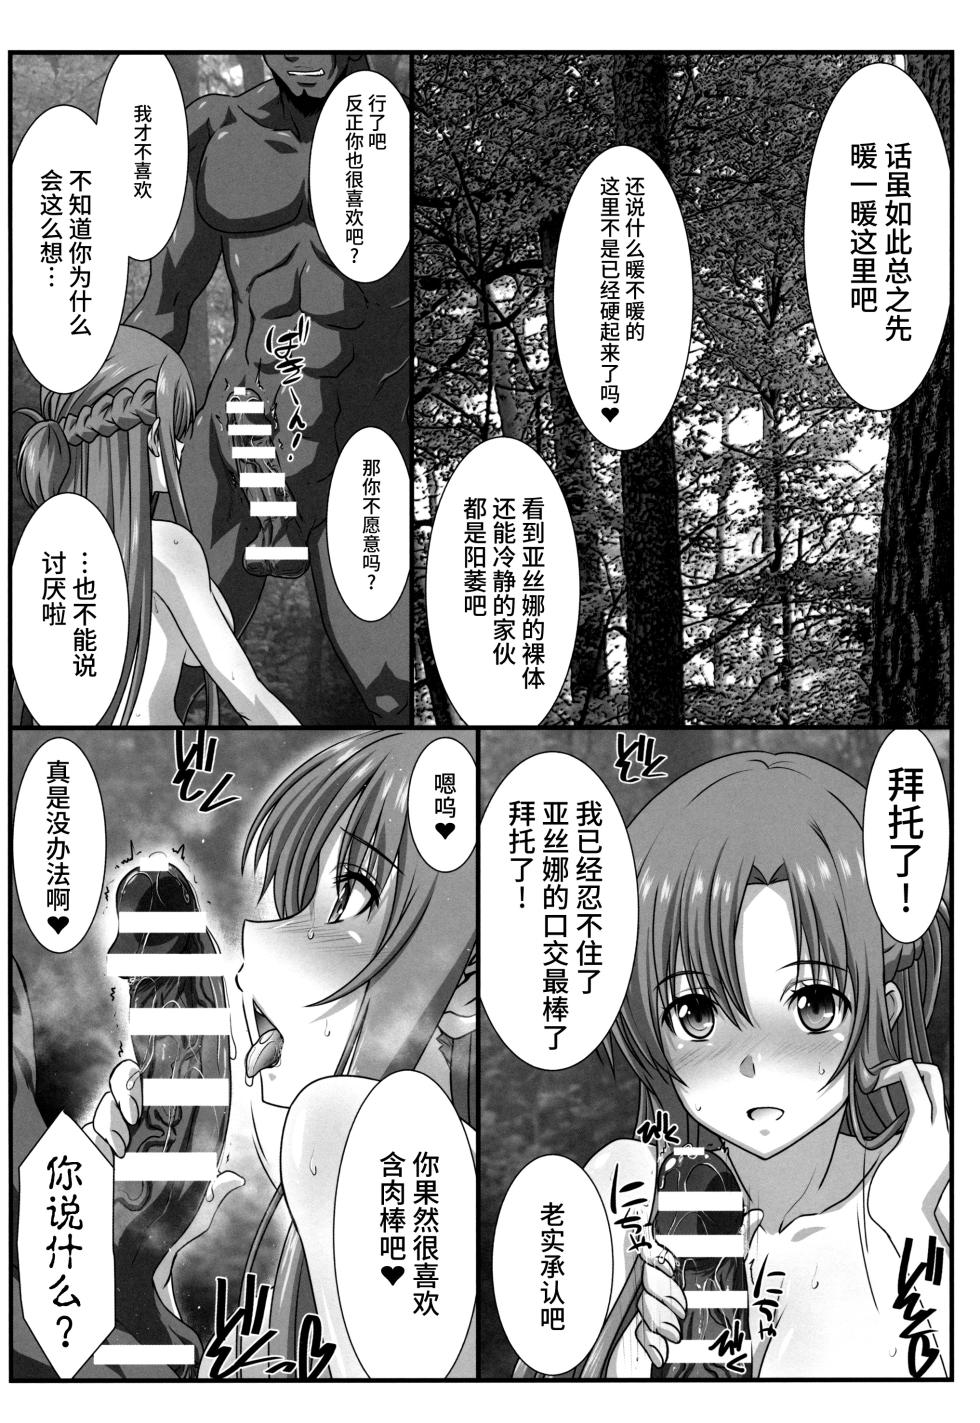 (C100) [STUDIO TRIUMPH (Mutou Keiji)] Astral Bout Ver. 45 (Sword Art Online) [Chinese] [不咕鸟汉化组] - Page 5